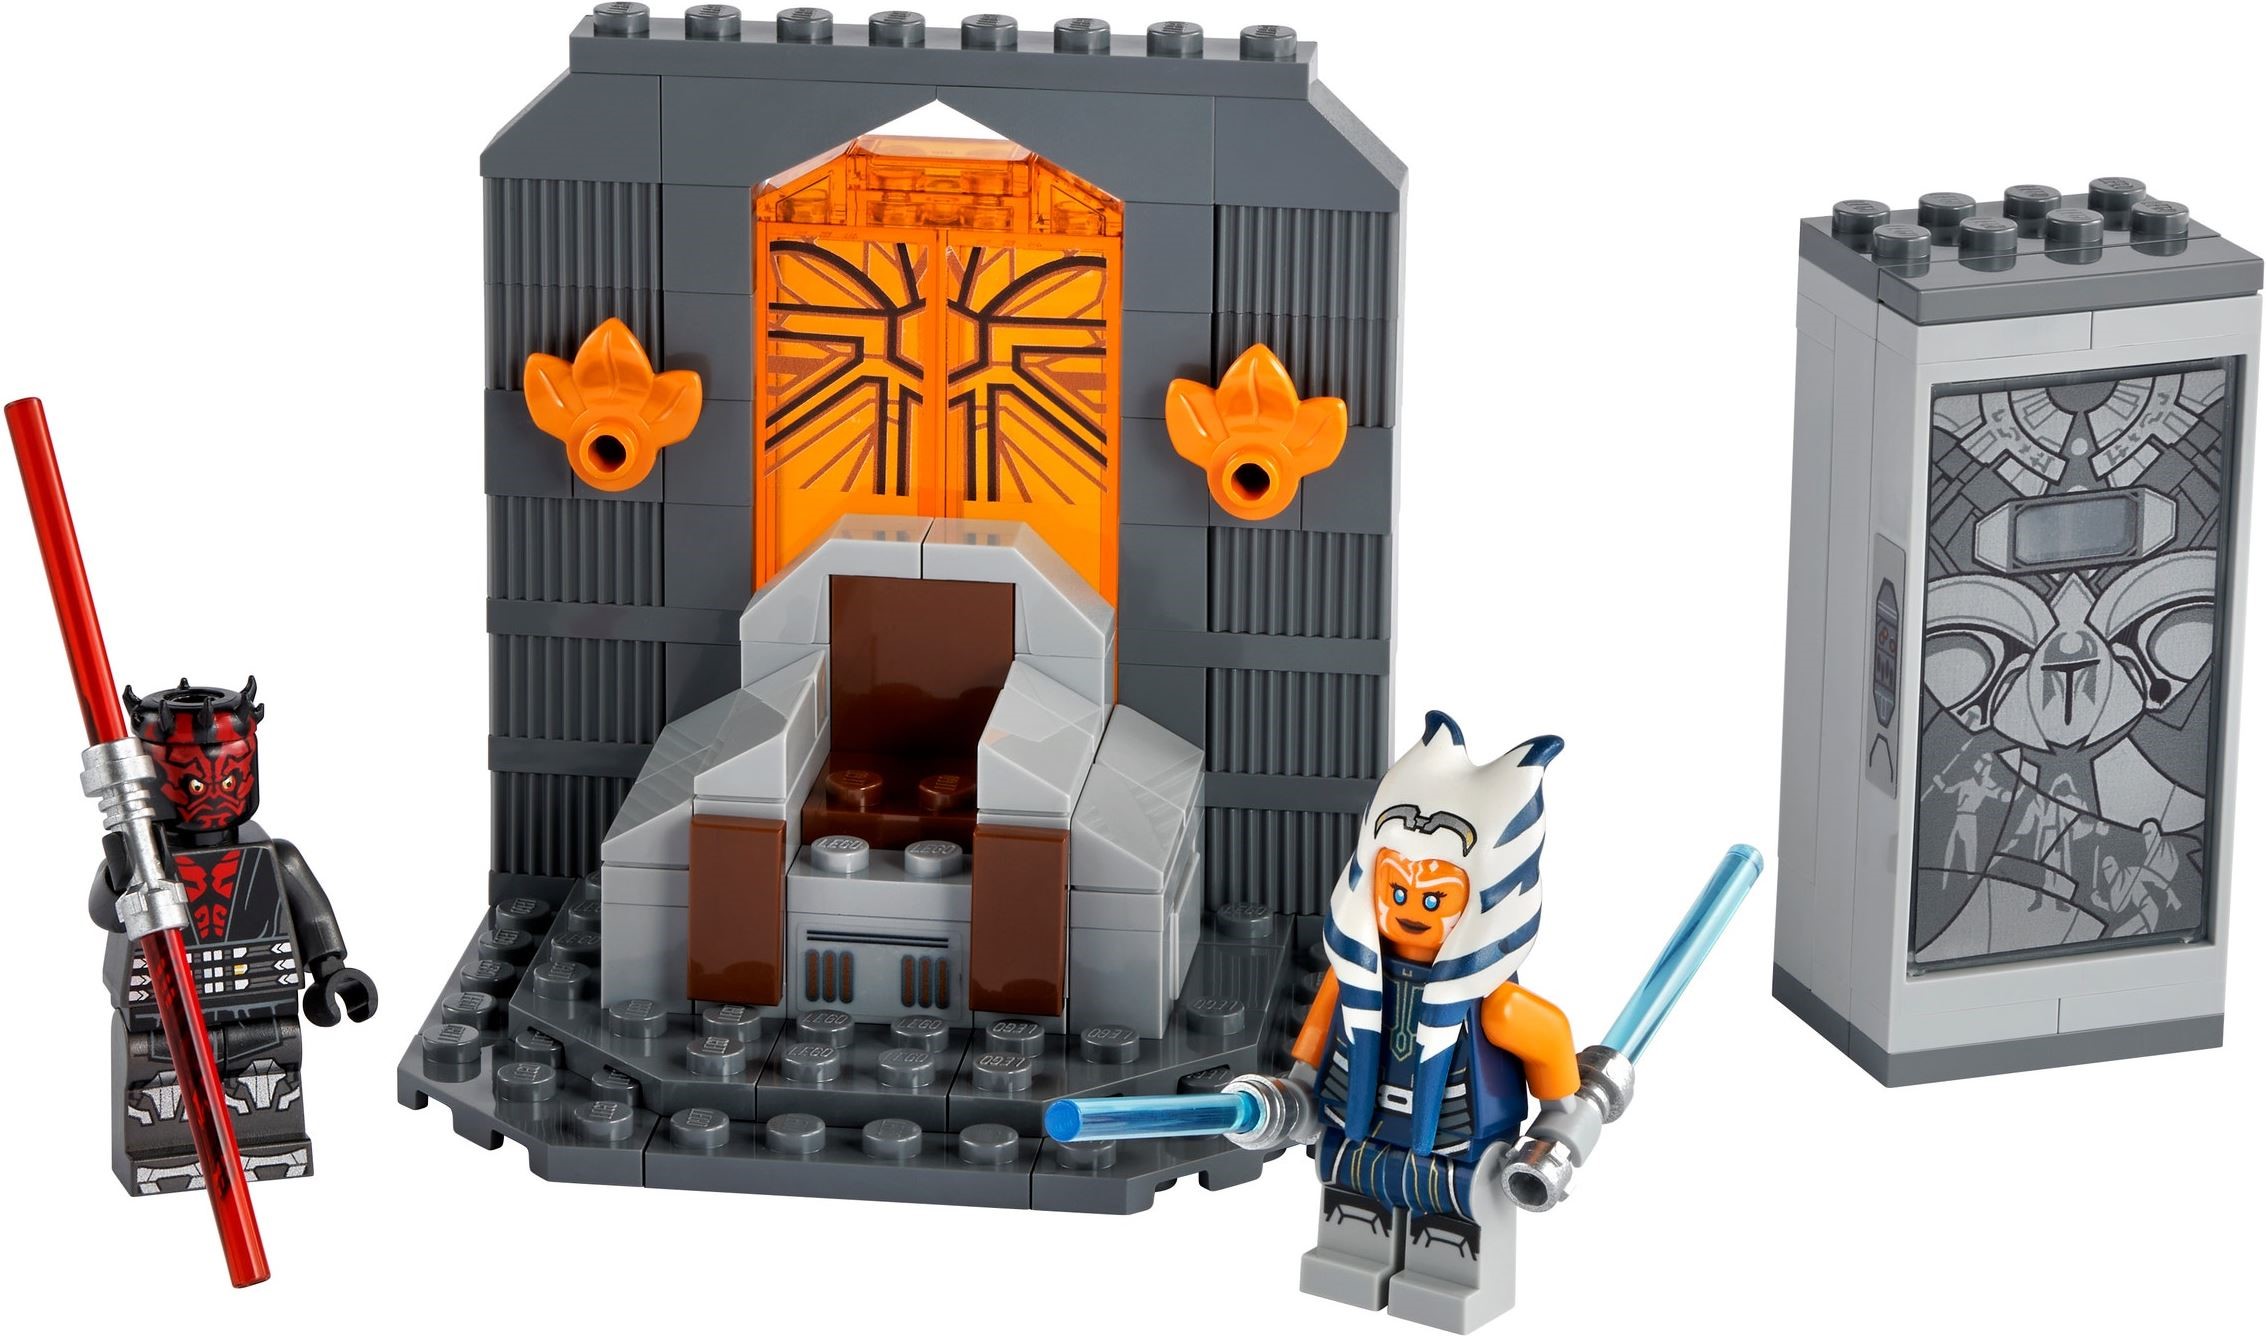 Duel On Mandalore And Mandalorian Starfighter Official Images Brickset Lego Set Guide And Database